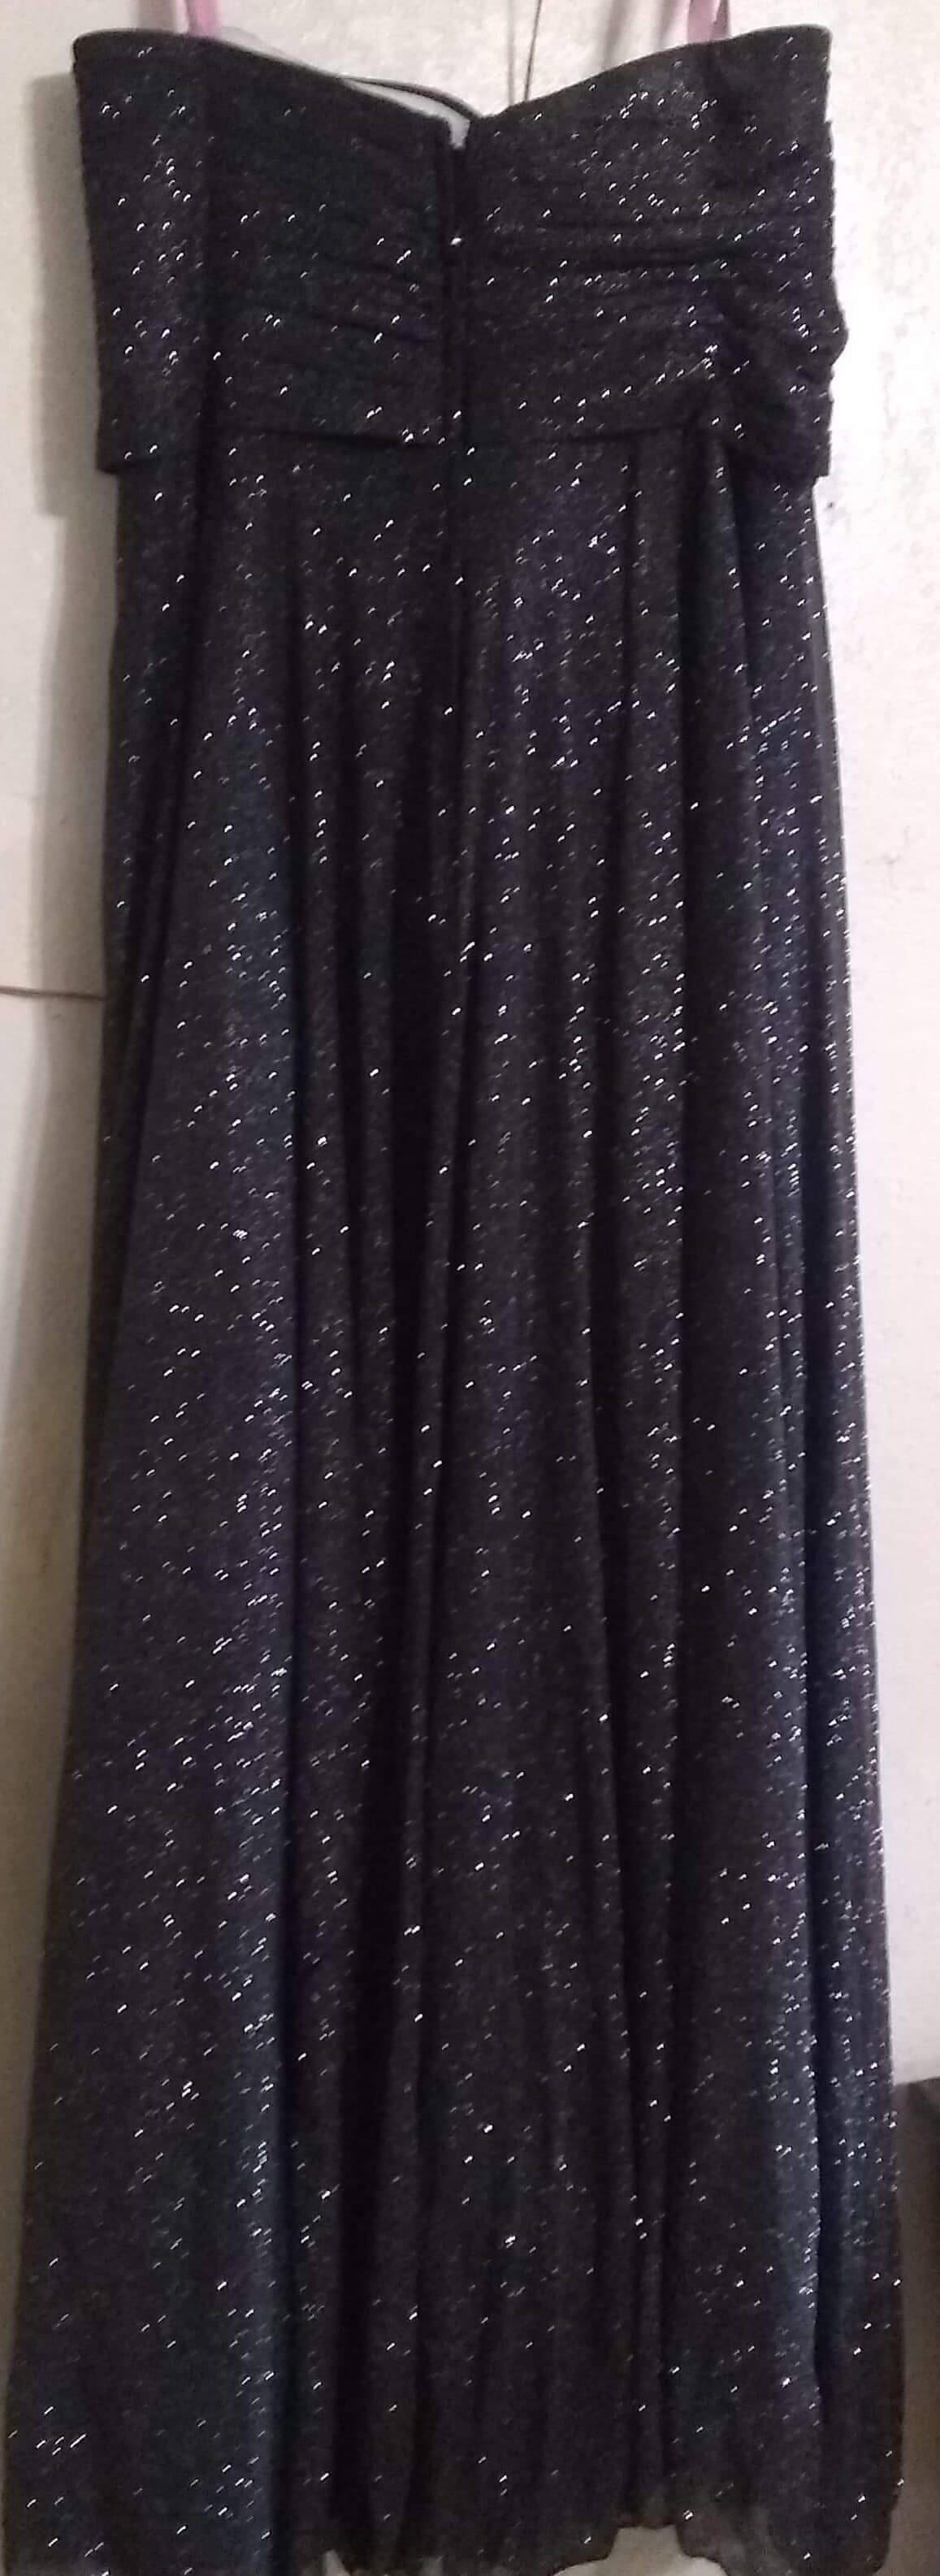 Blush Prom Size 14 Prom Strapless Sequined Black Ball Gown on Queenly